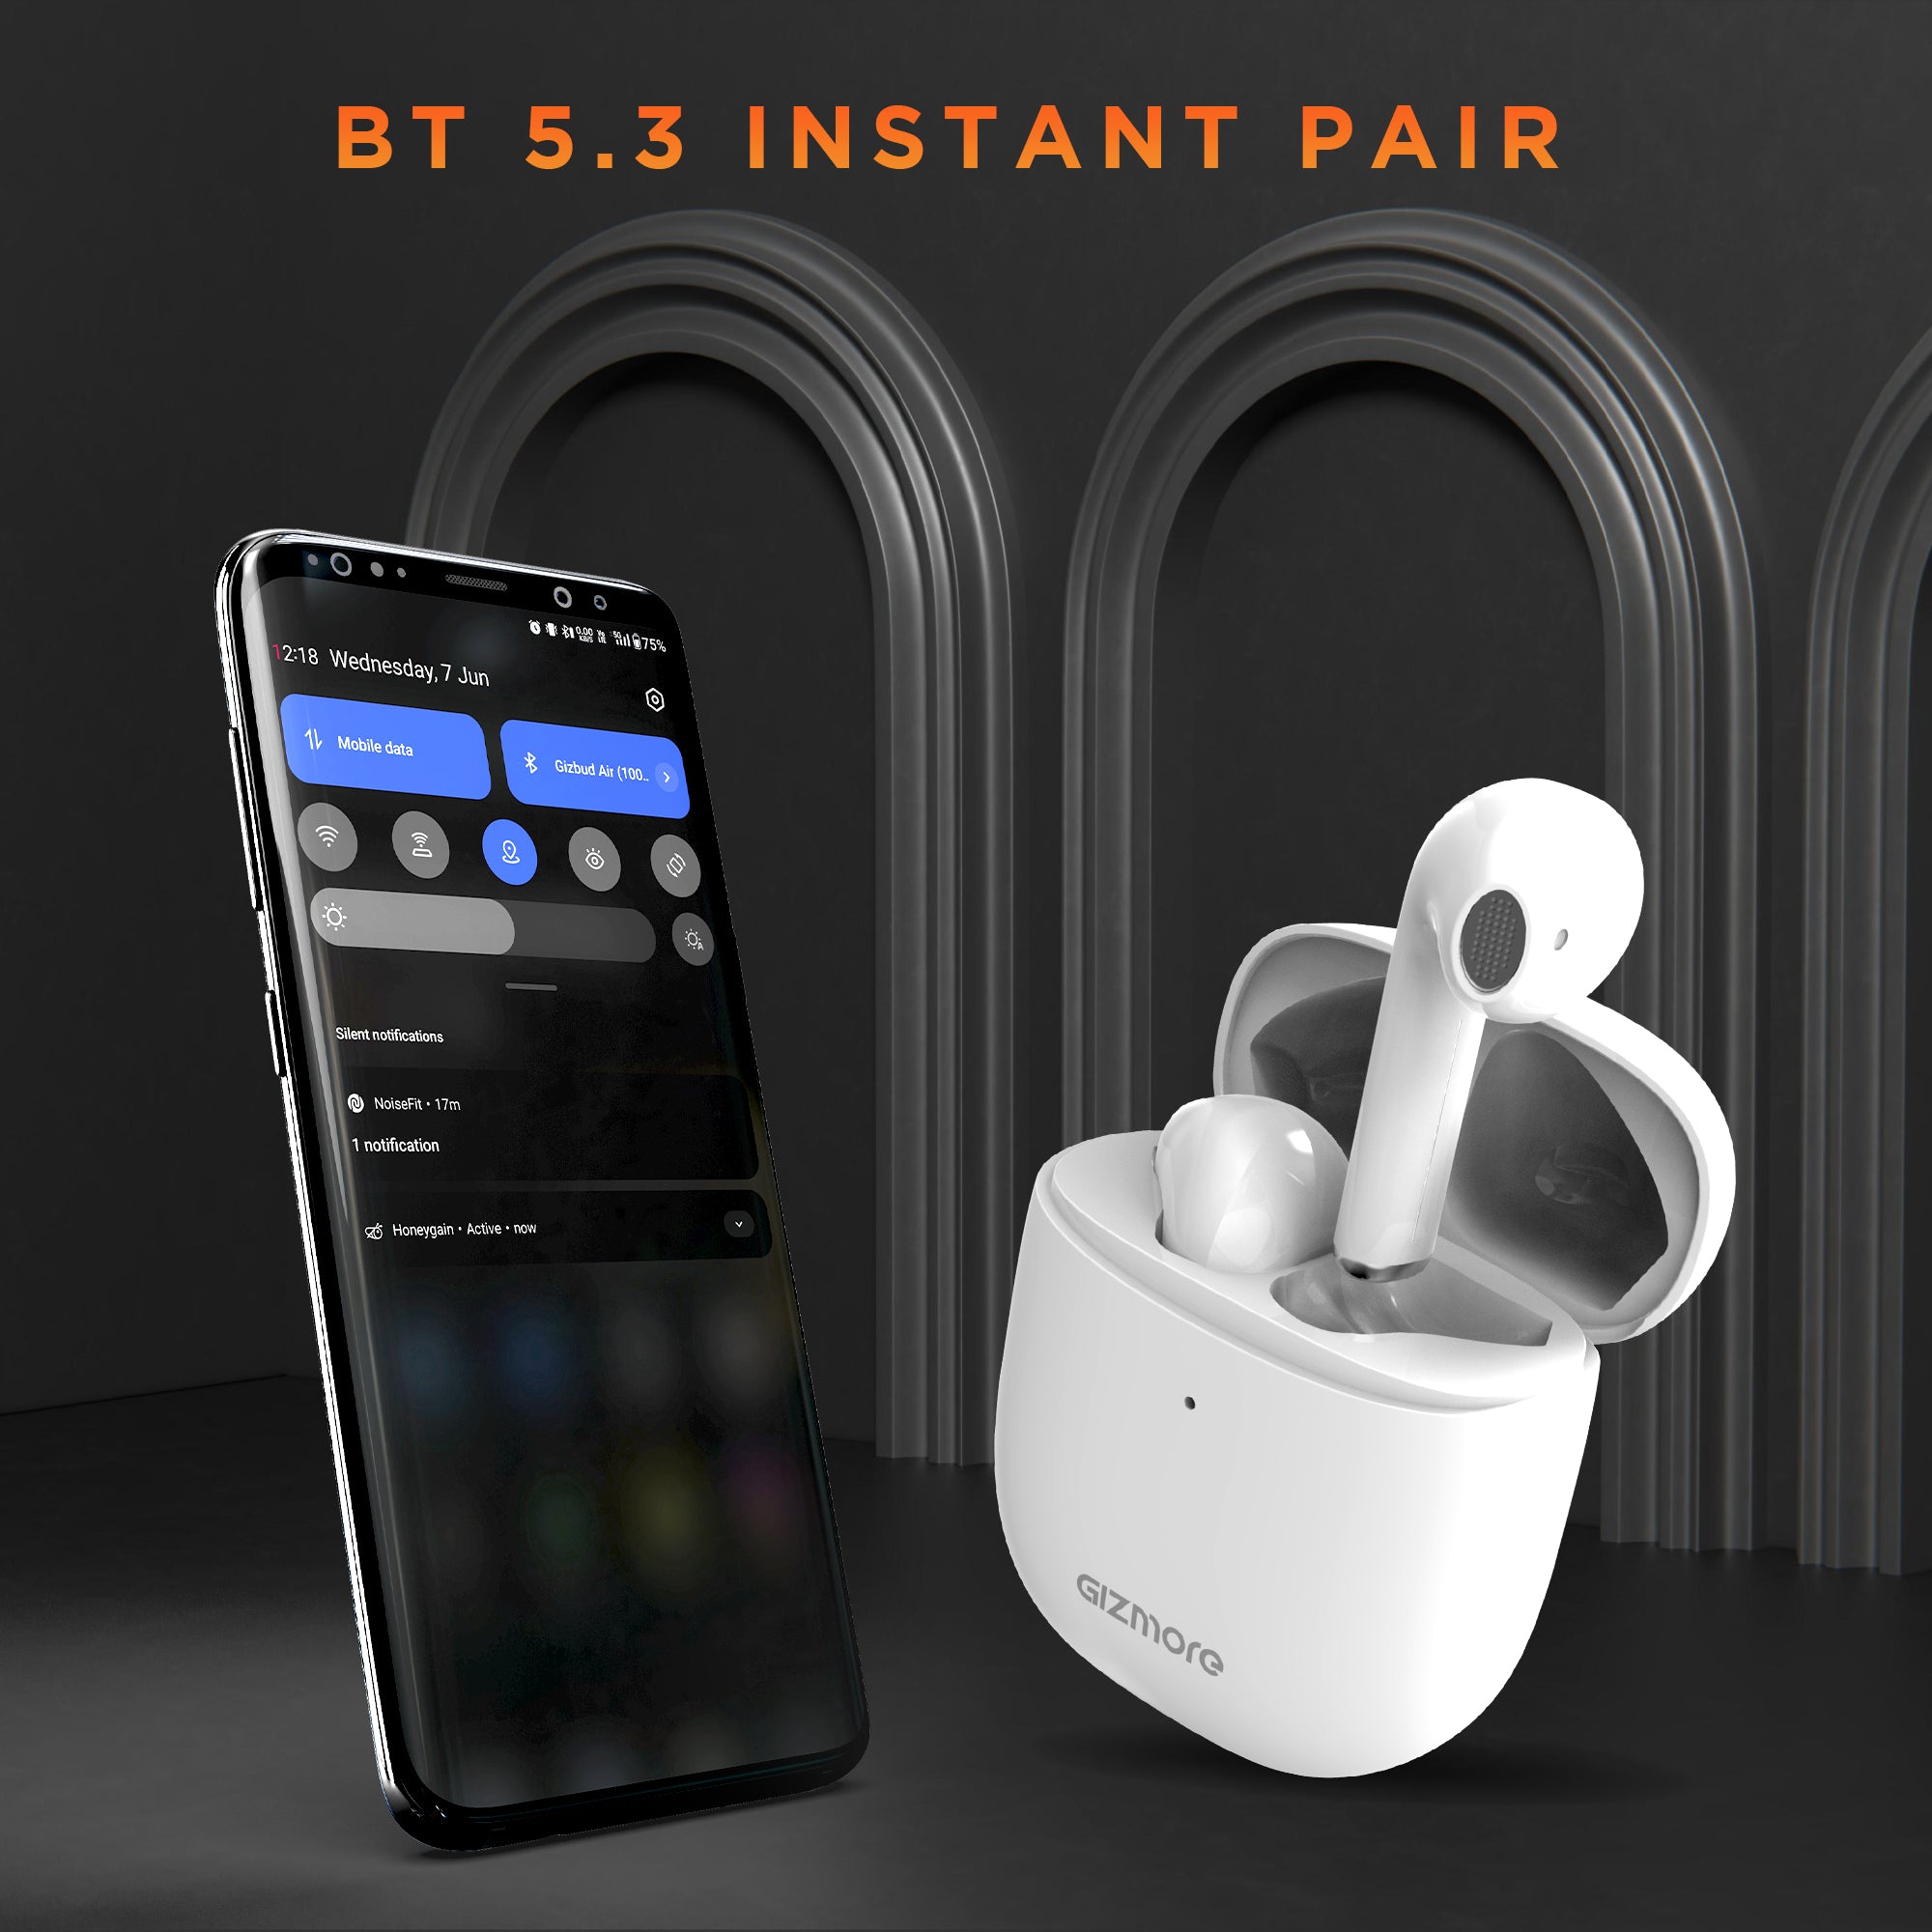 Gizmore 801 Air Earbuds with Massive 25H Playback Voice Assistant & Type C Fast Charging